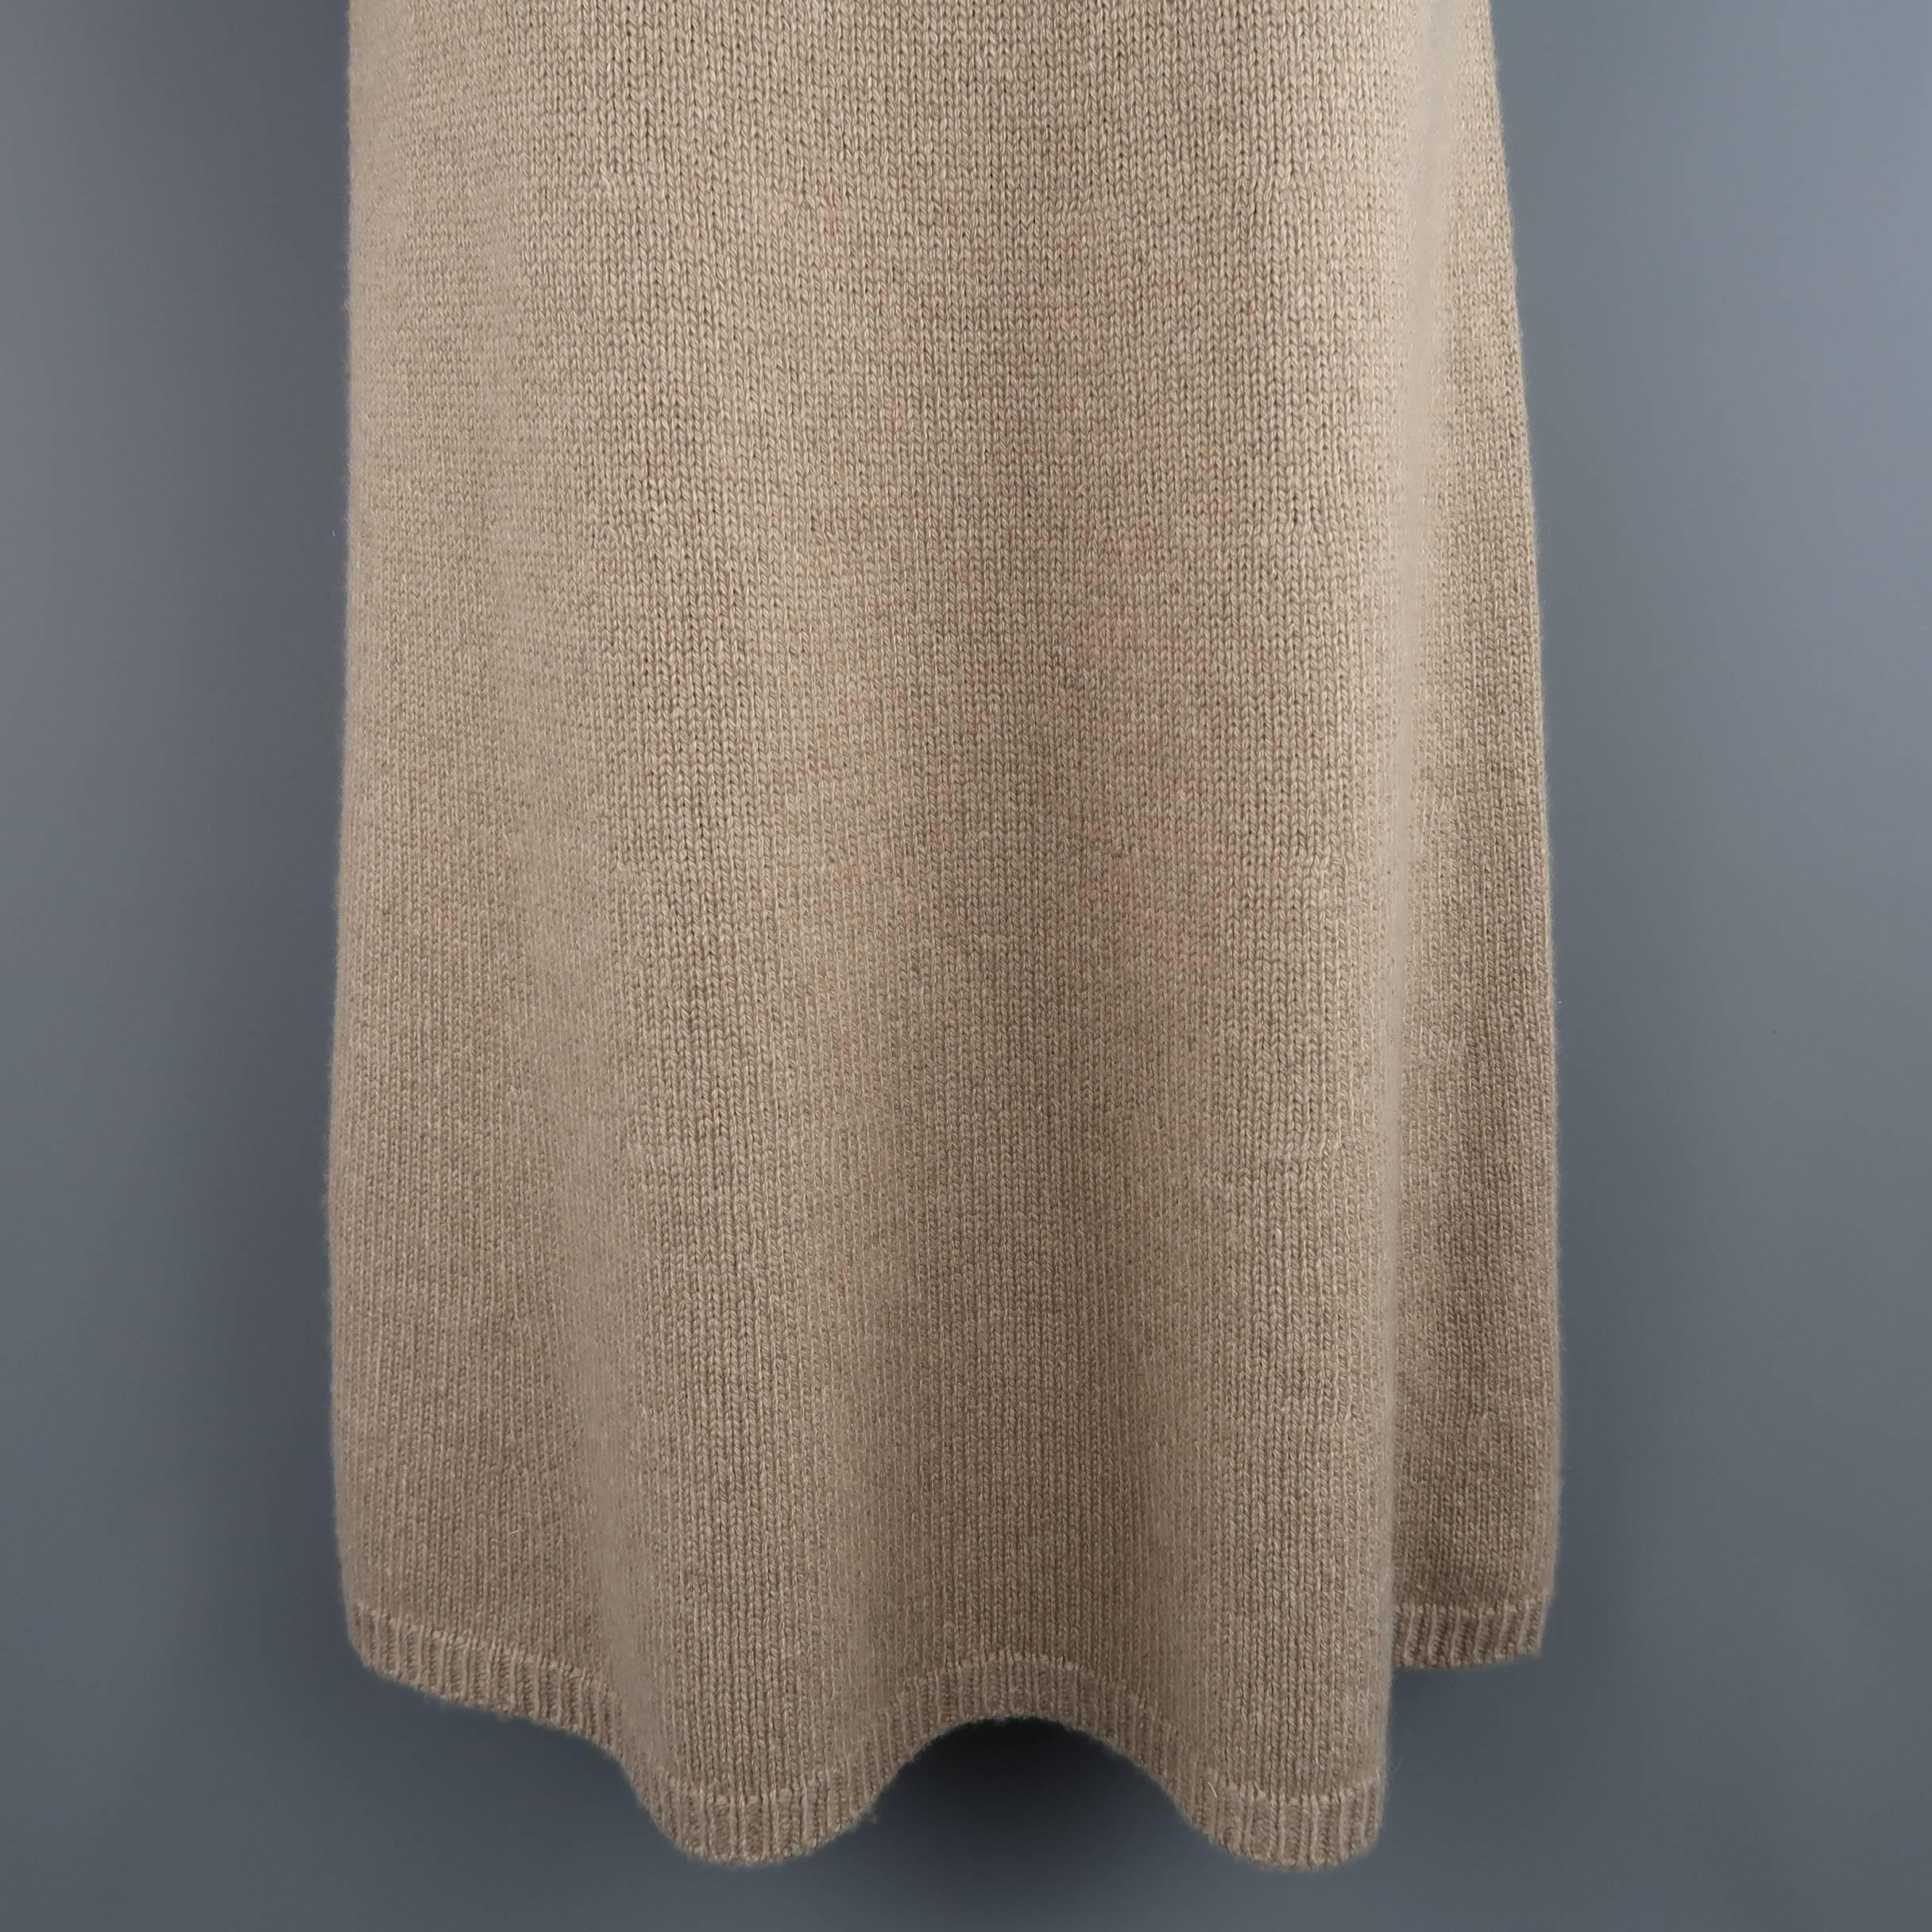 RALPH LAUREN COLLECTION midi skirt comes in a cashmere knit and features a high rise with stretch waistband, and fitted flair silhouette. Made in Italy.
 
Excellent Pre-Owned Condition.
Marked: M
 
Measurements:
 
Waist: 26 in.
Hip: 34 in.
Length: